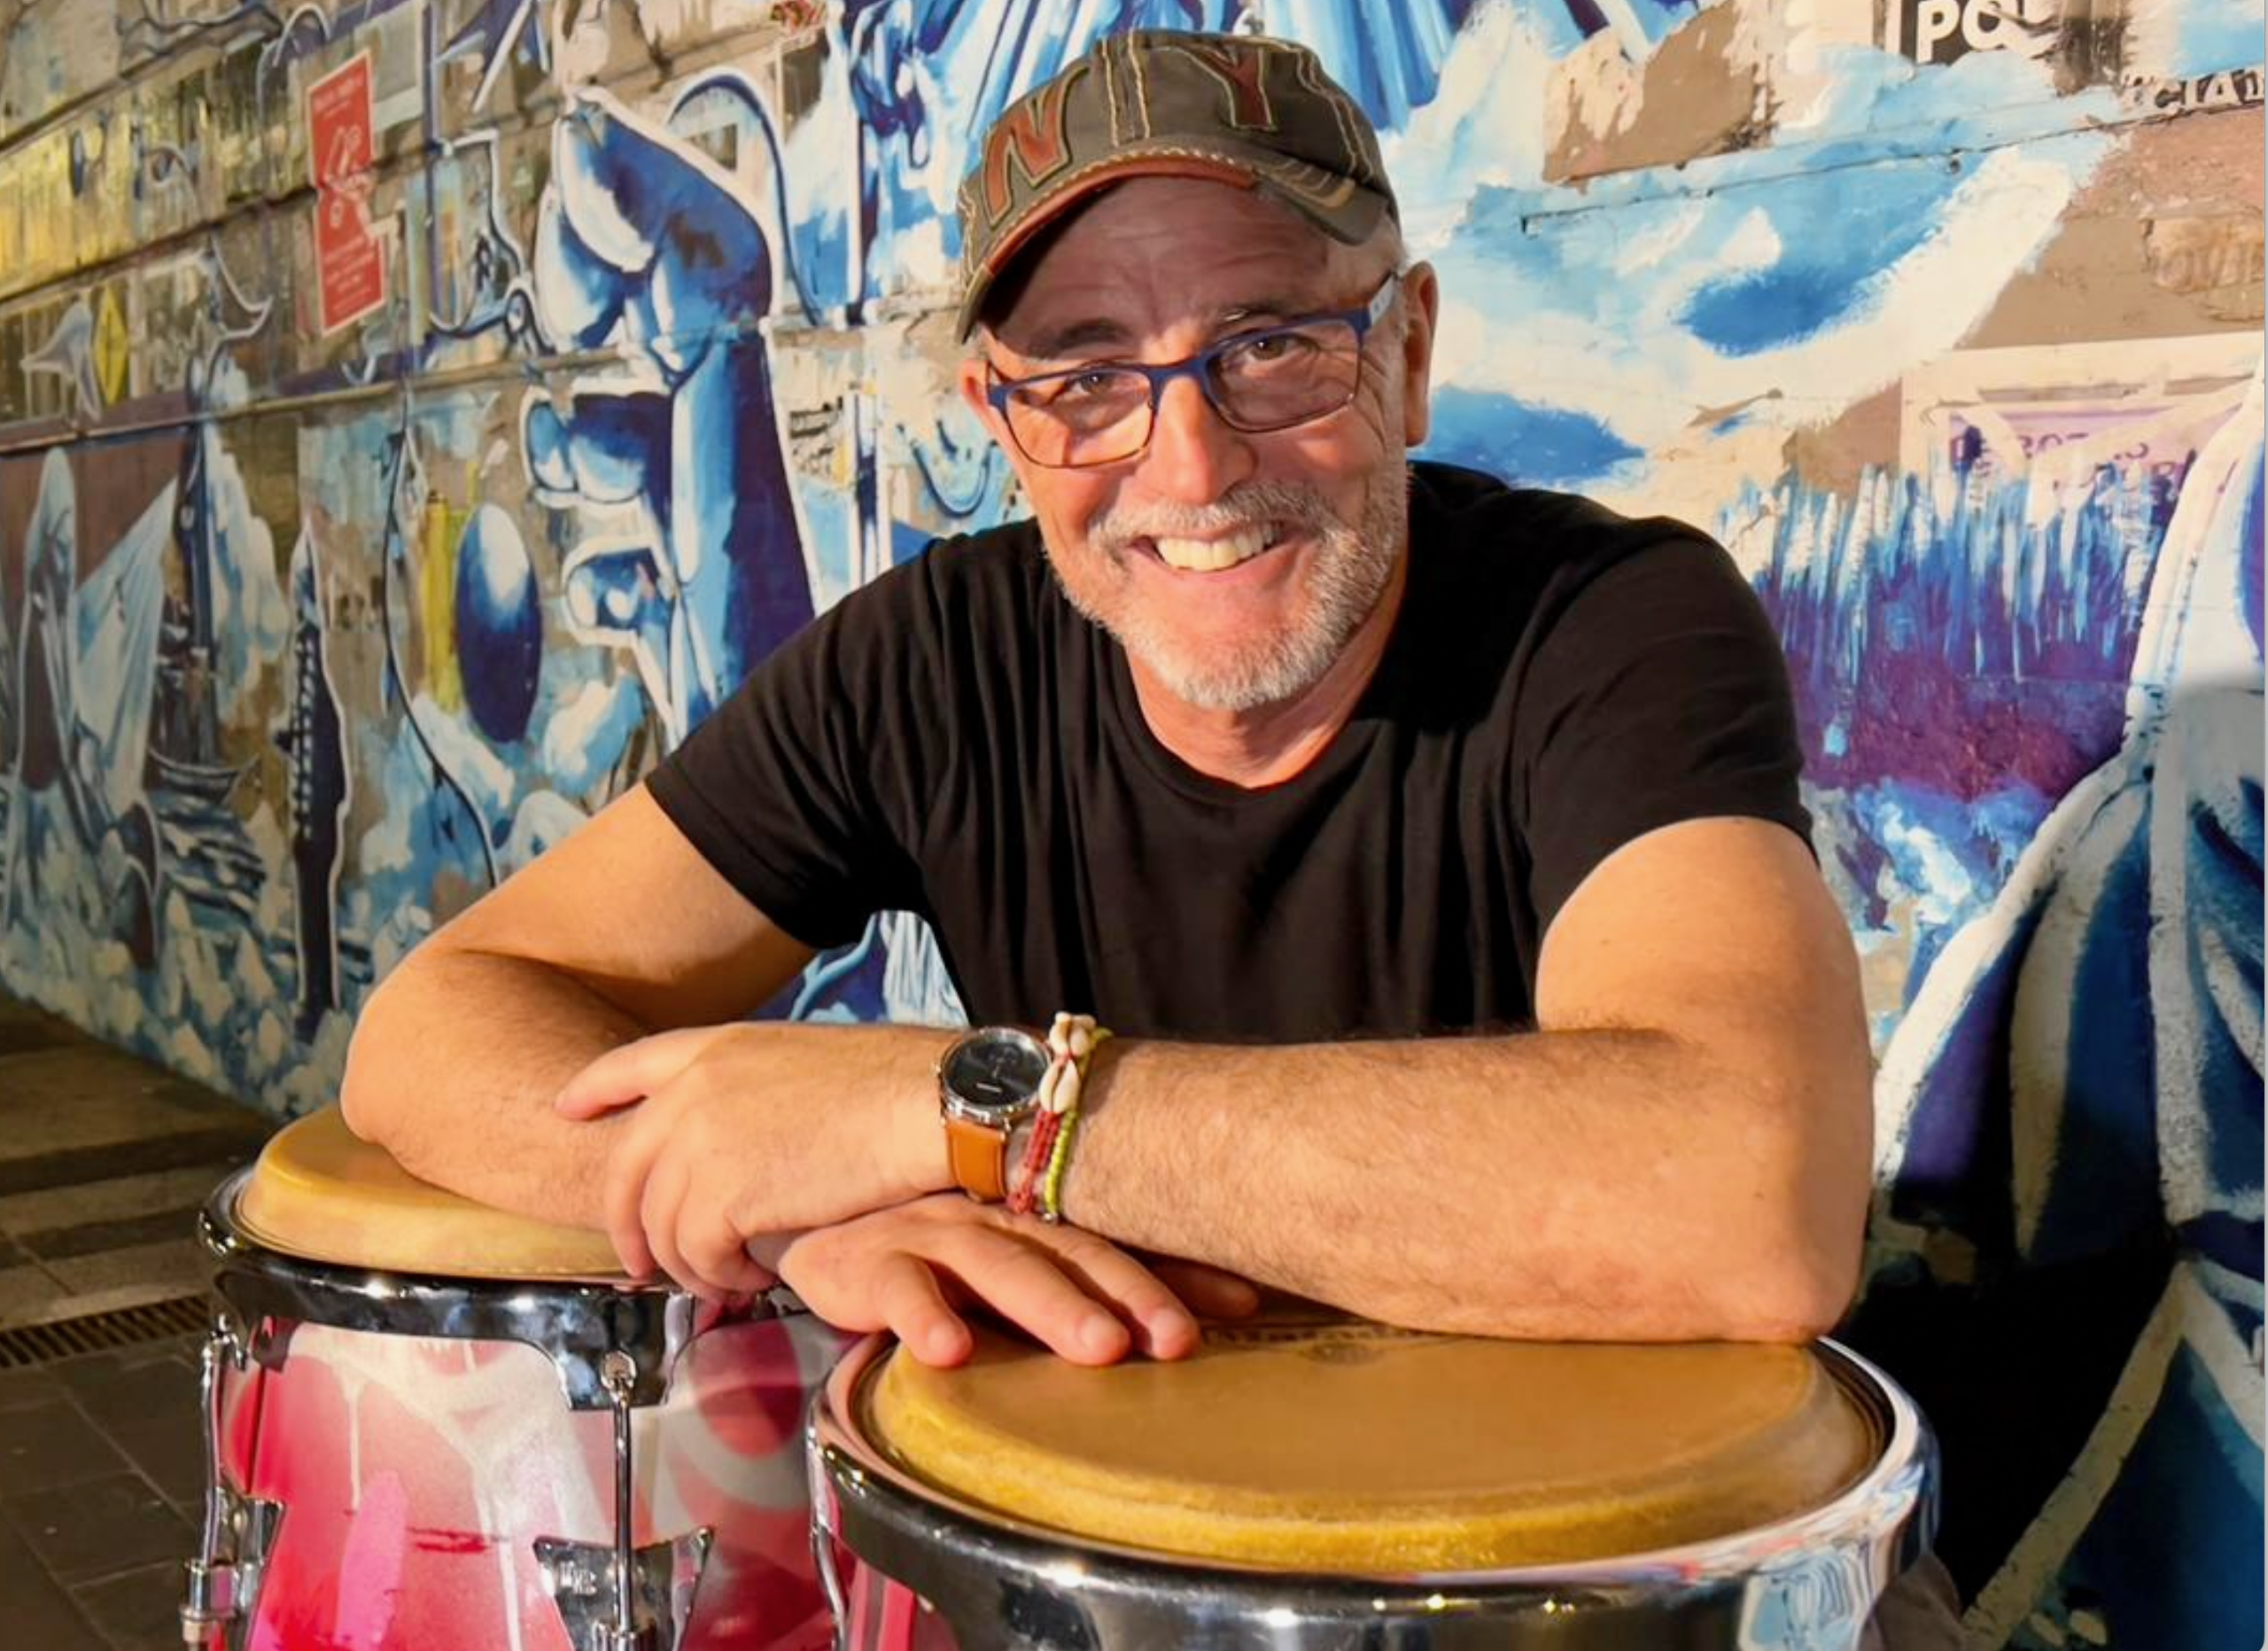 Man smiling and leaning on conga drums. Man is wearing a hat and glasses